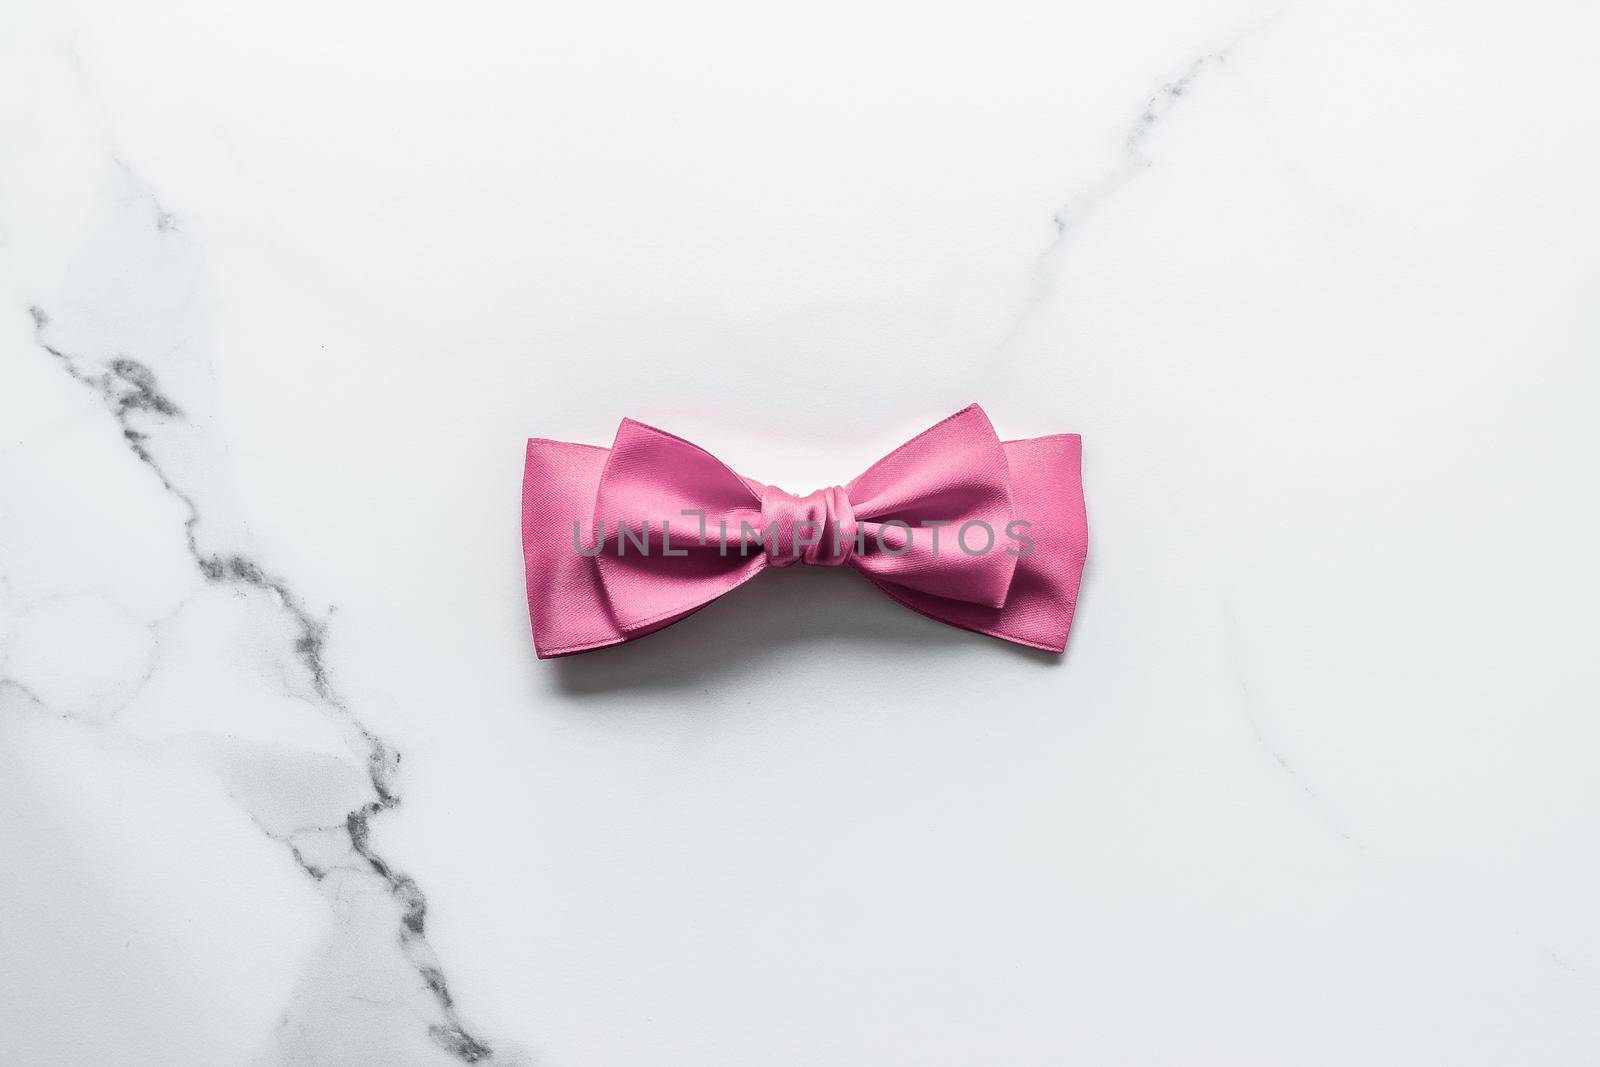 Birthday, wedding and girly branding concept - Pink silk ribbon and bow on marble background, girl baby shower present and glamour fashion gift decor for luxury beauty brand, holiday flatlay design